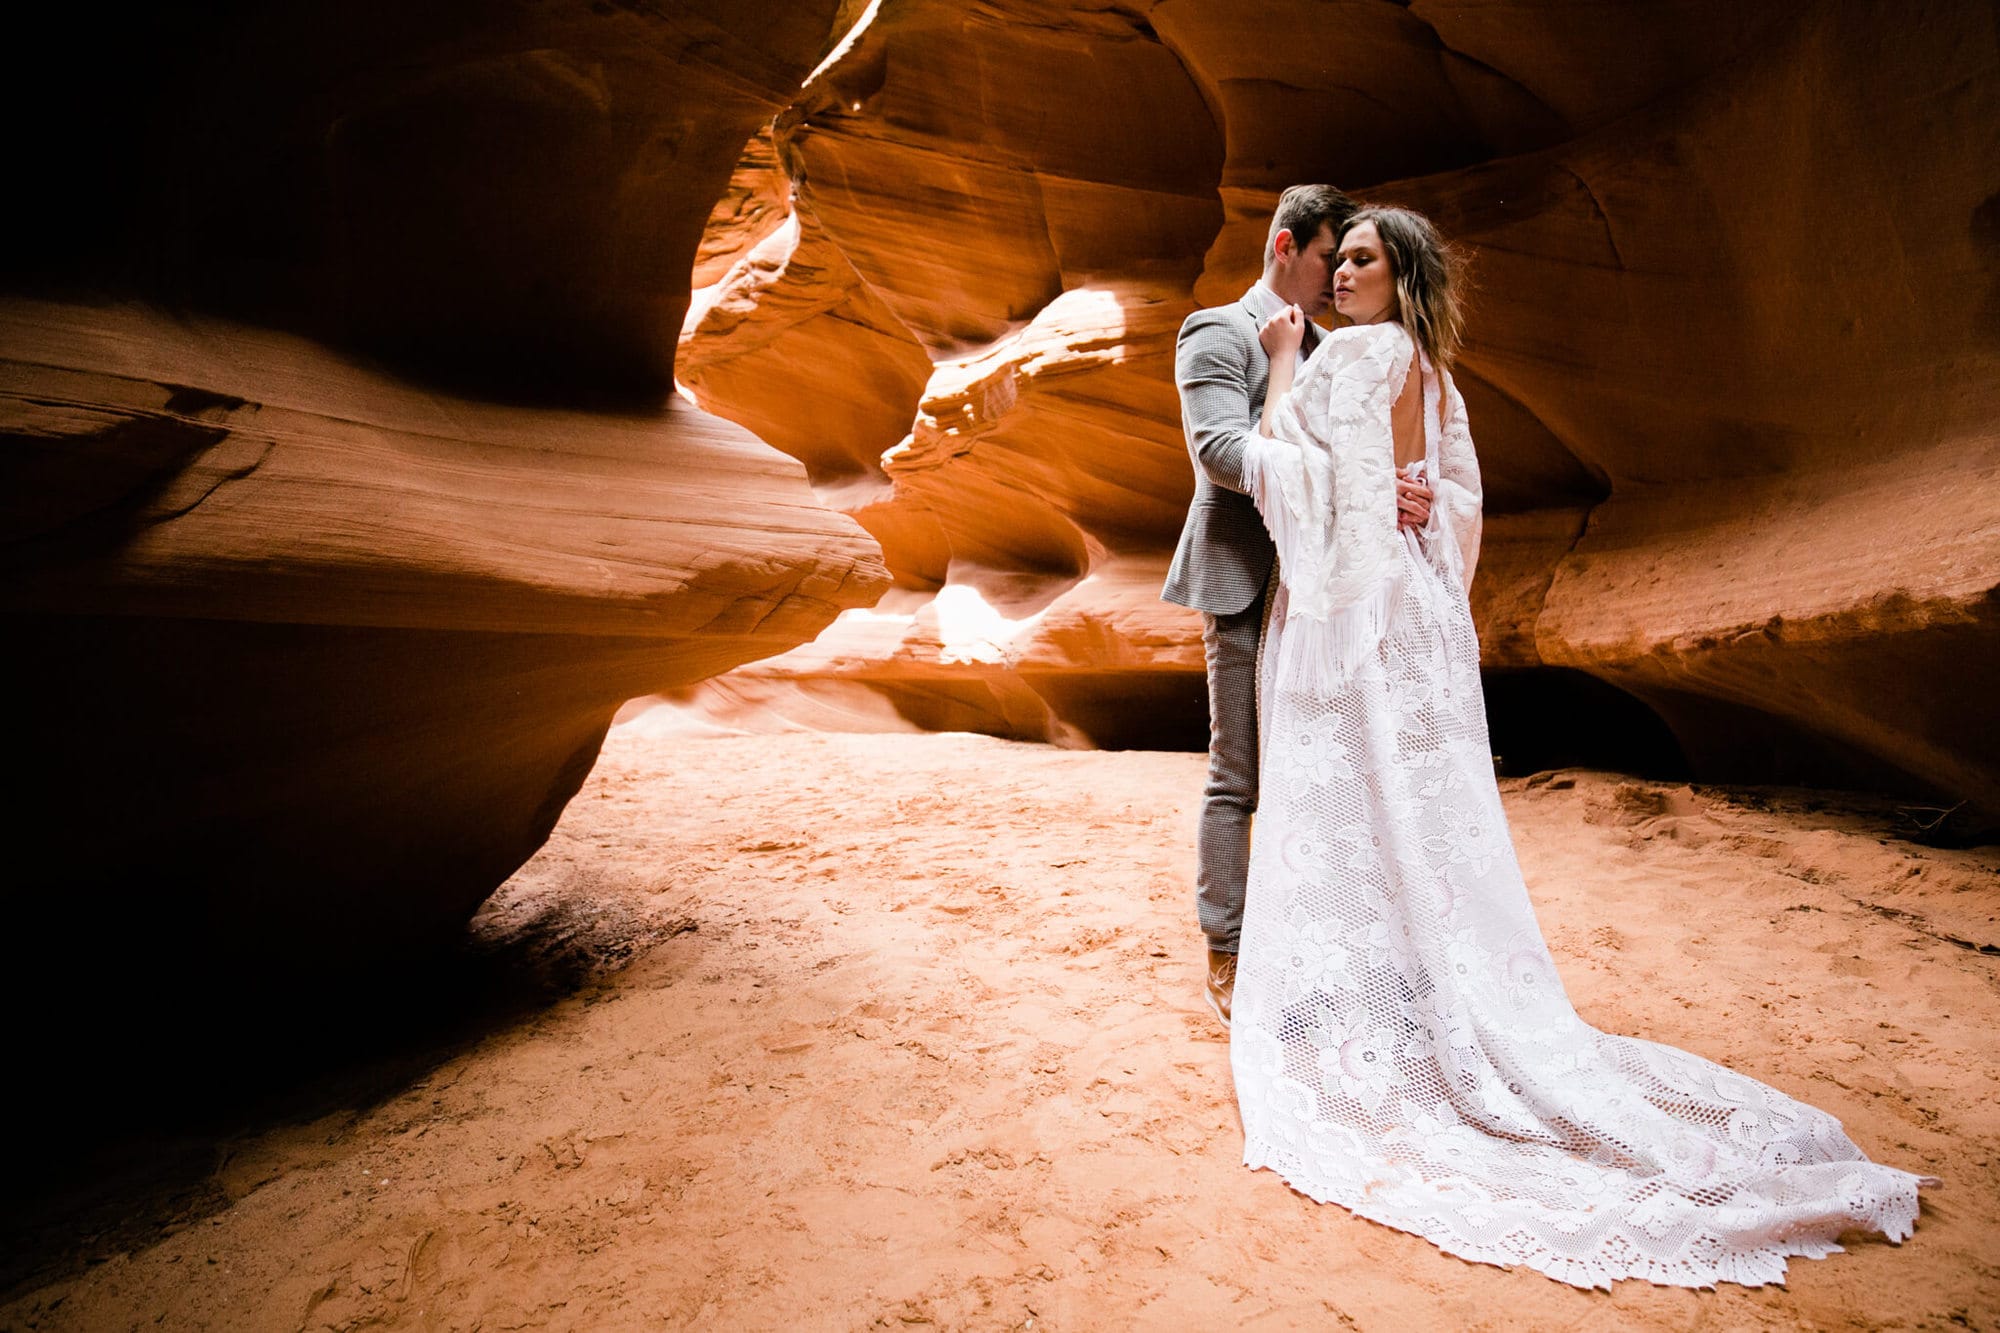 This insanely epic Slot Canyon Elopement in Arizona is the perfect inspiration for all your boho desert vibe elopement dreams!